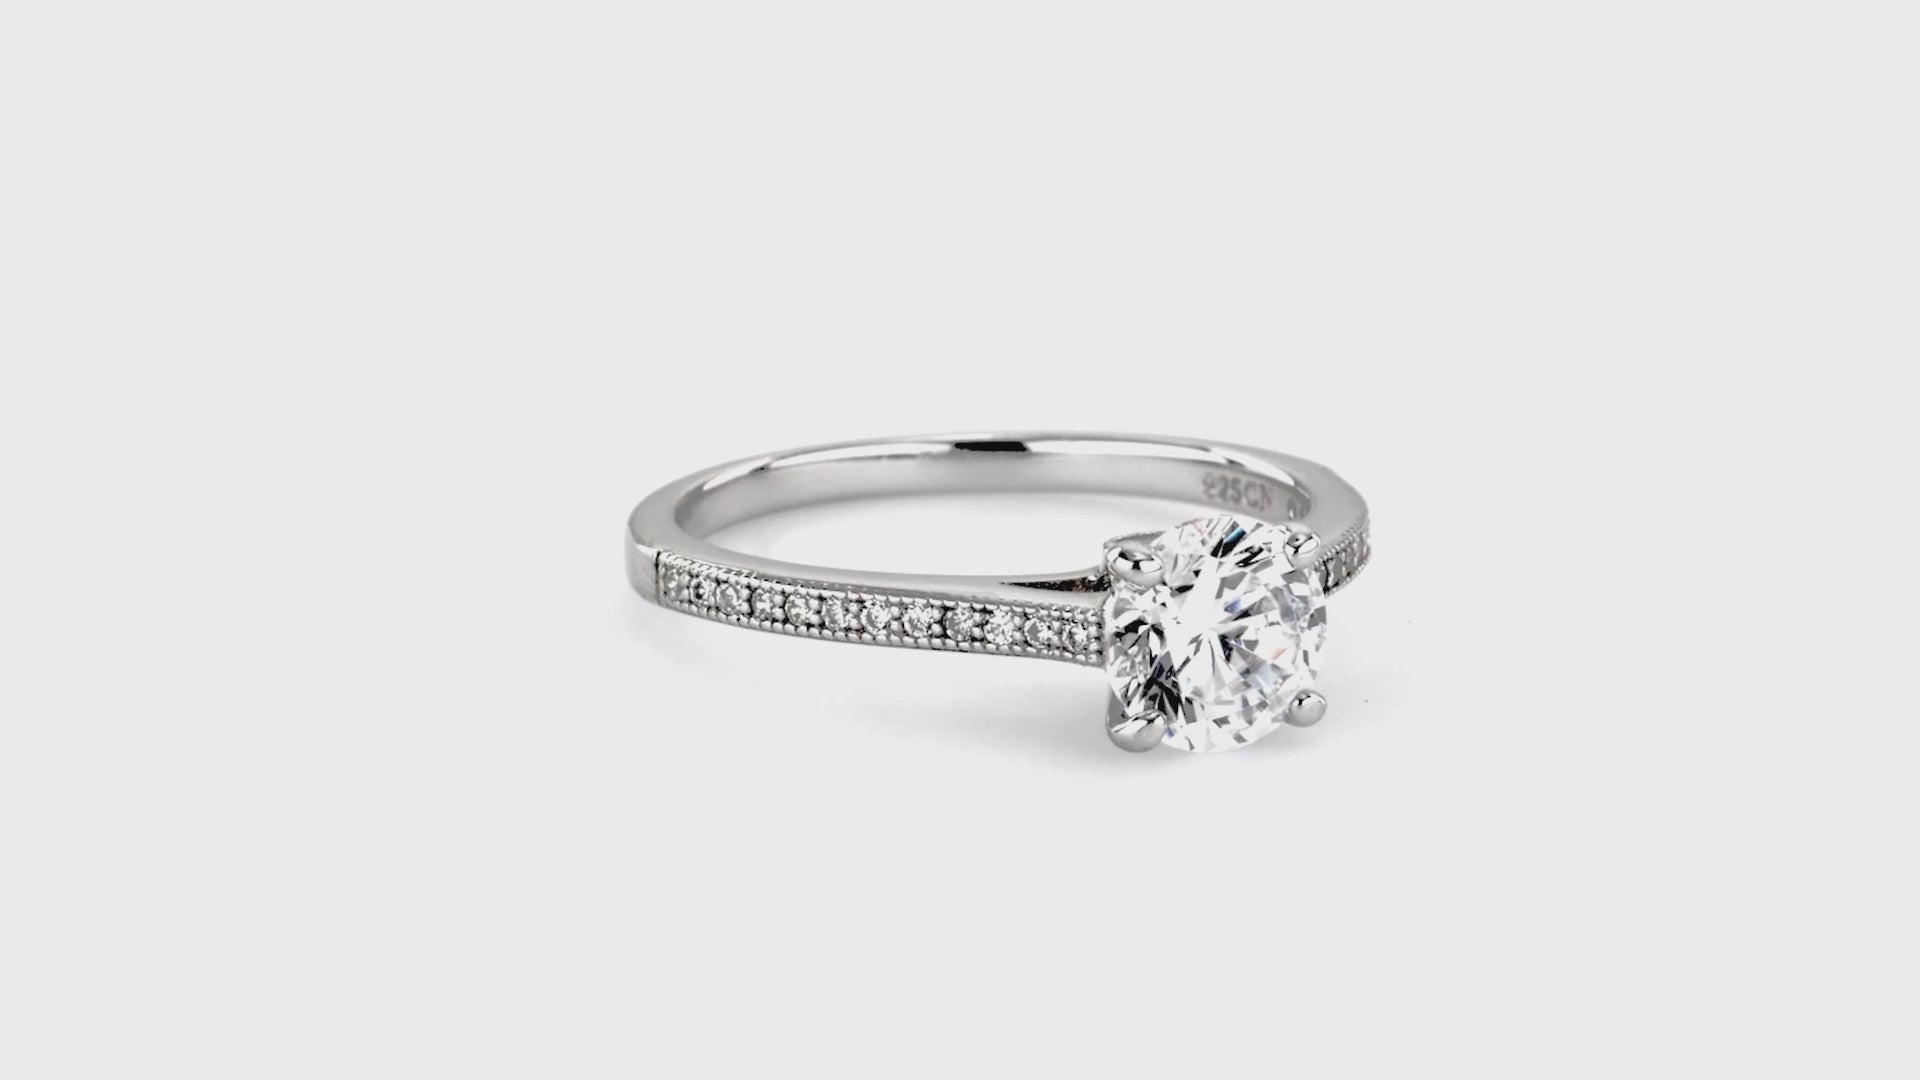 Video Contains Solitaire 1ct Round CZ Ring Set in Sterling Silver. Style Number VR333-01